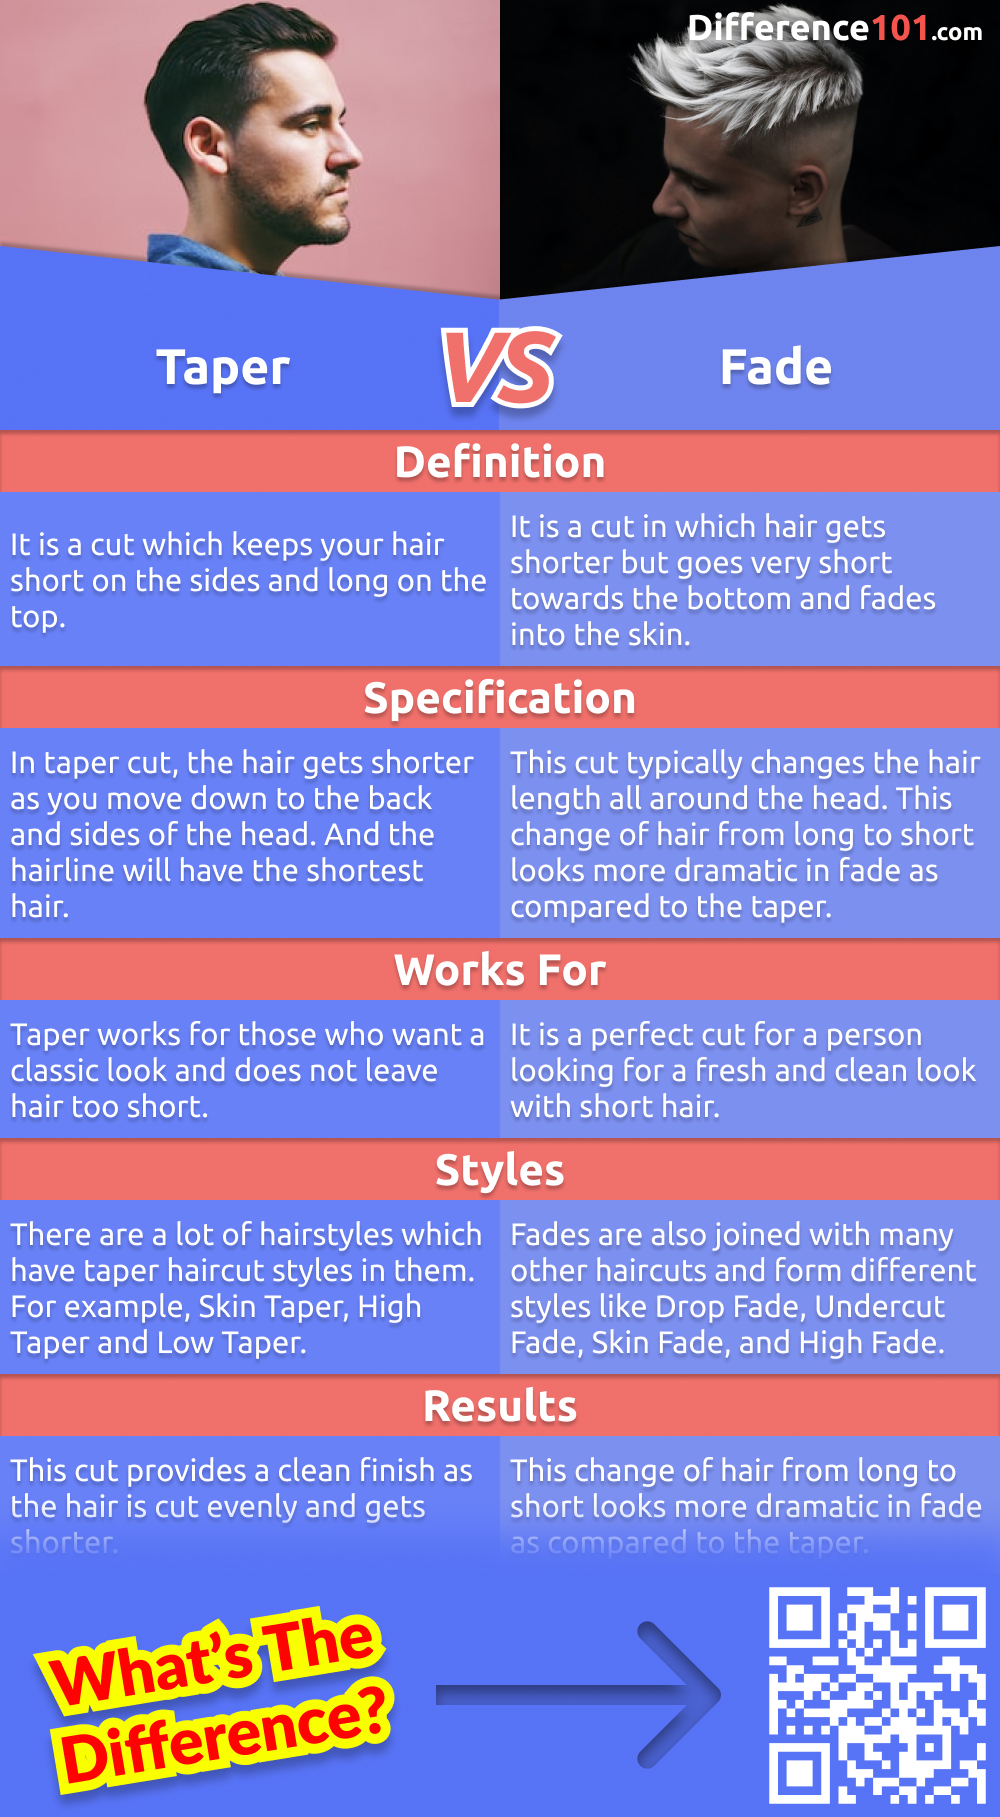 Are you trying to decide between a taper and a fade haircut? Both are popular styles, but they have different looks. Here's a comparison of the two hairstyles so you can decide which one is right for you.